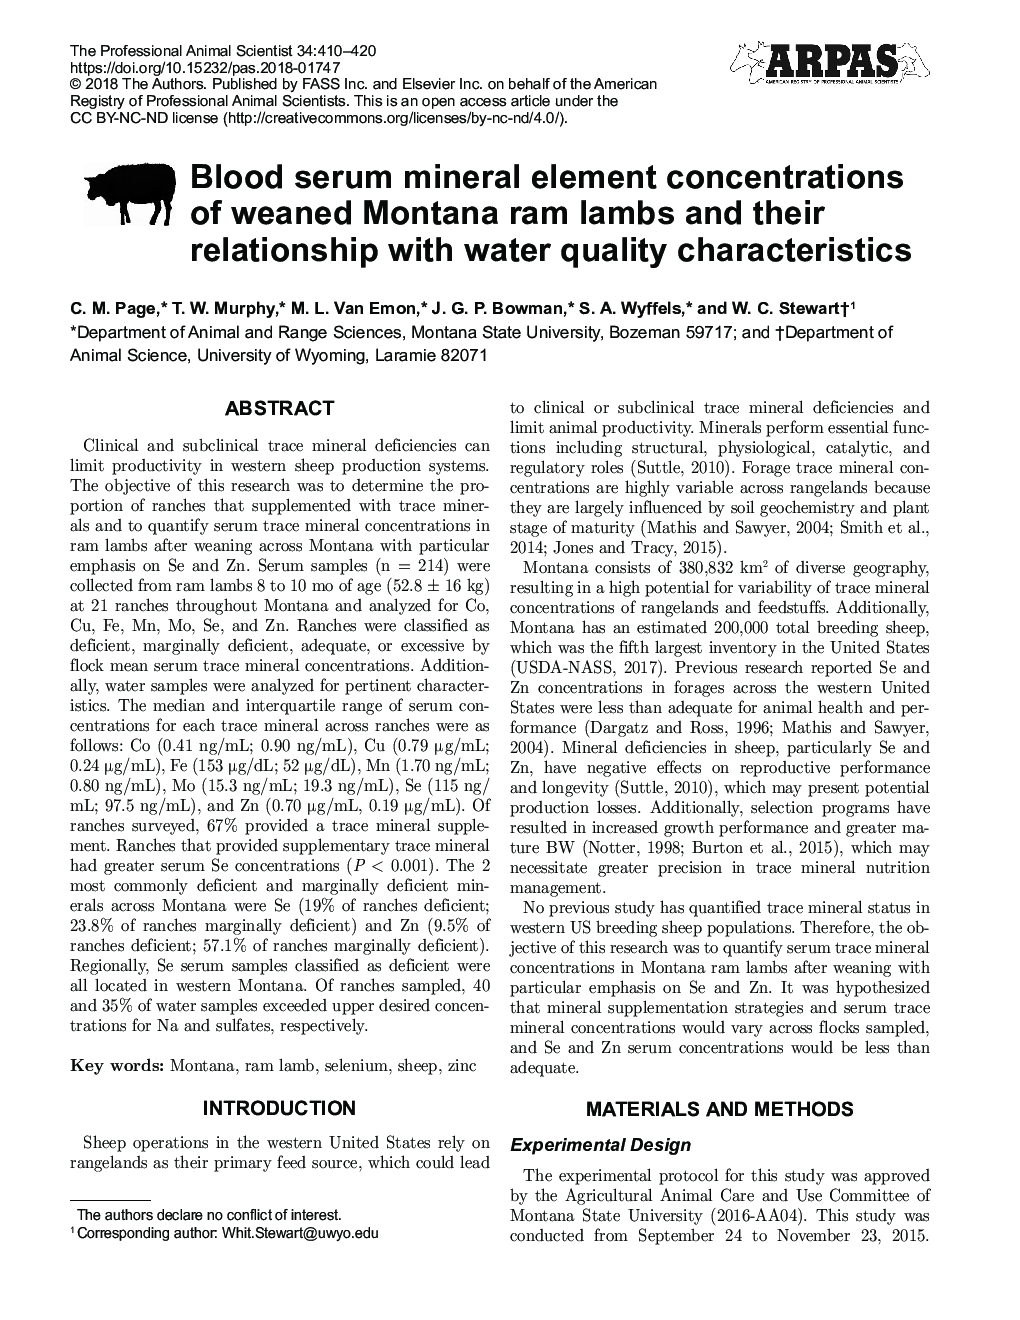 Blood serum mineral element concentrations of weaned Montana ram lambs and their relationship with water quality characteristics